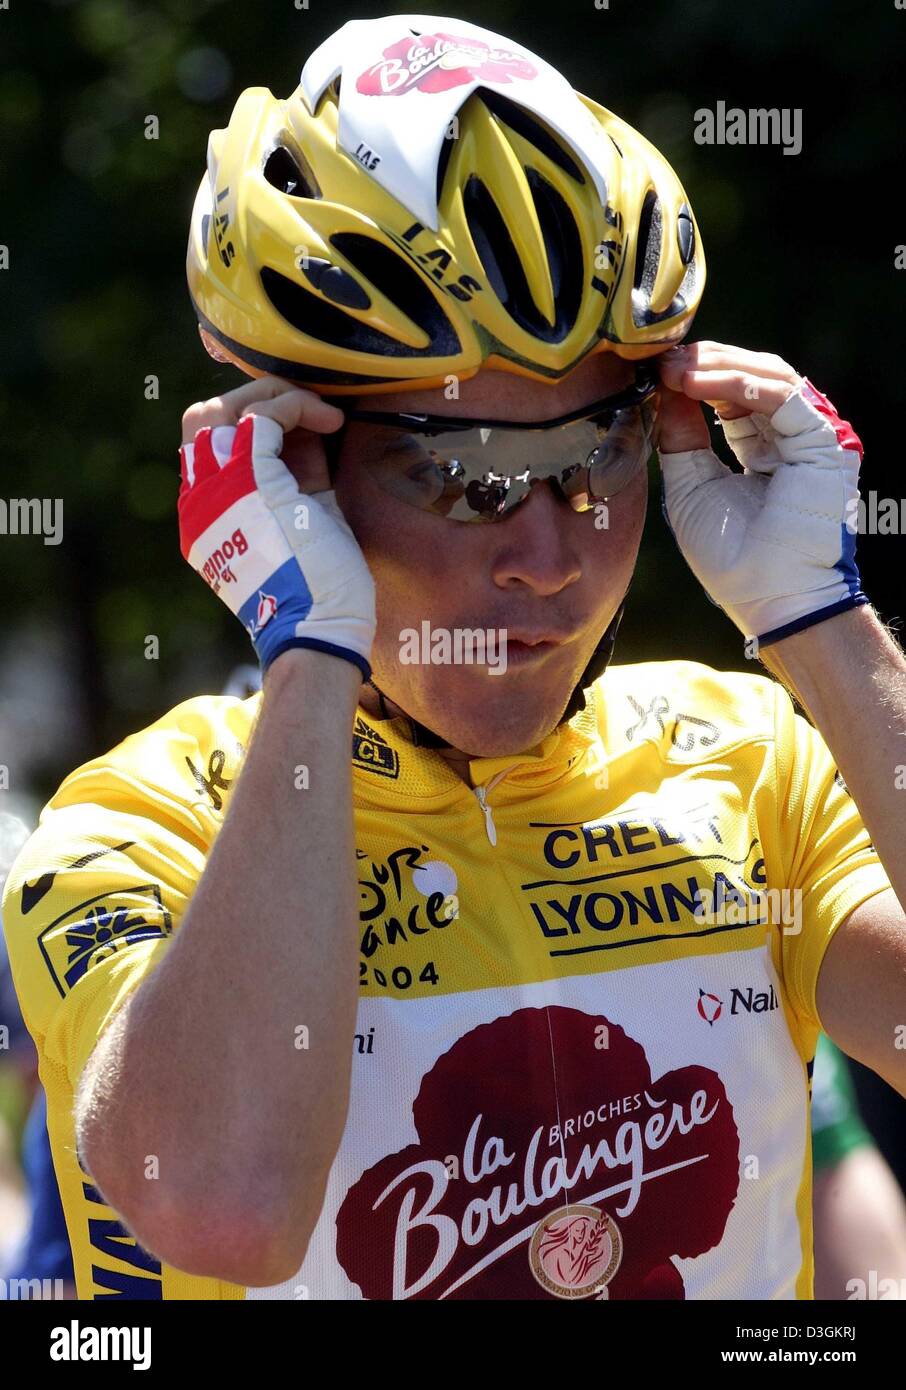 (dpa) French cyclist Thomas Voeckler of team Brioches La Boulangere, wearing the yellow jersey of the overall leader, awaits the start of the 11th stage of the Tour de France cycling race in Saint-Flour, France, 15 July 2004. The 164km long stage leads the cyclists from Saint-Flour to Figeac. Stock Photo